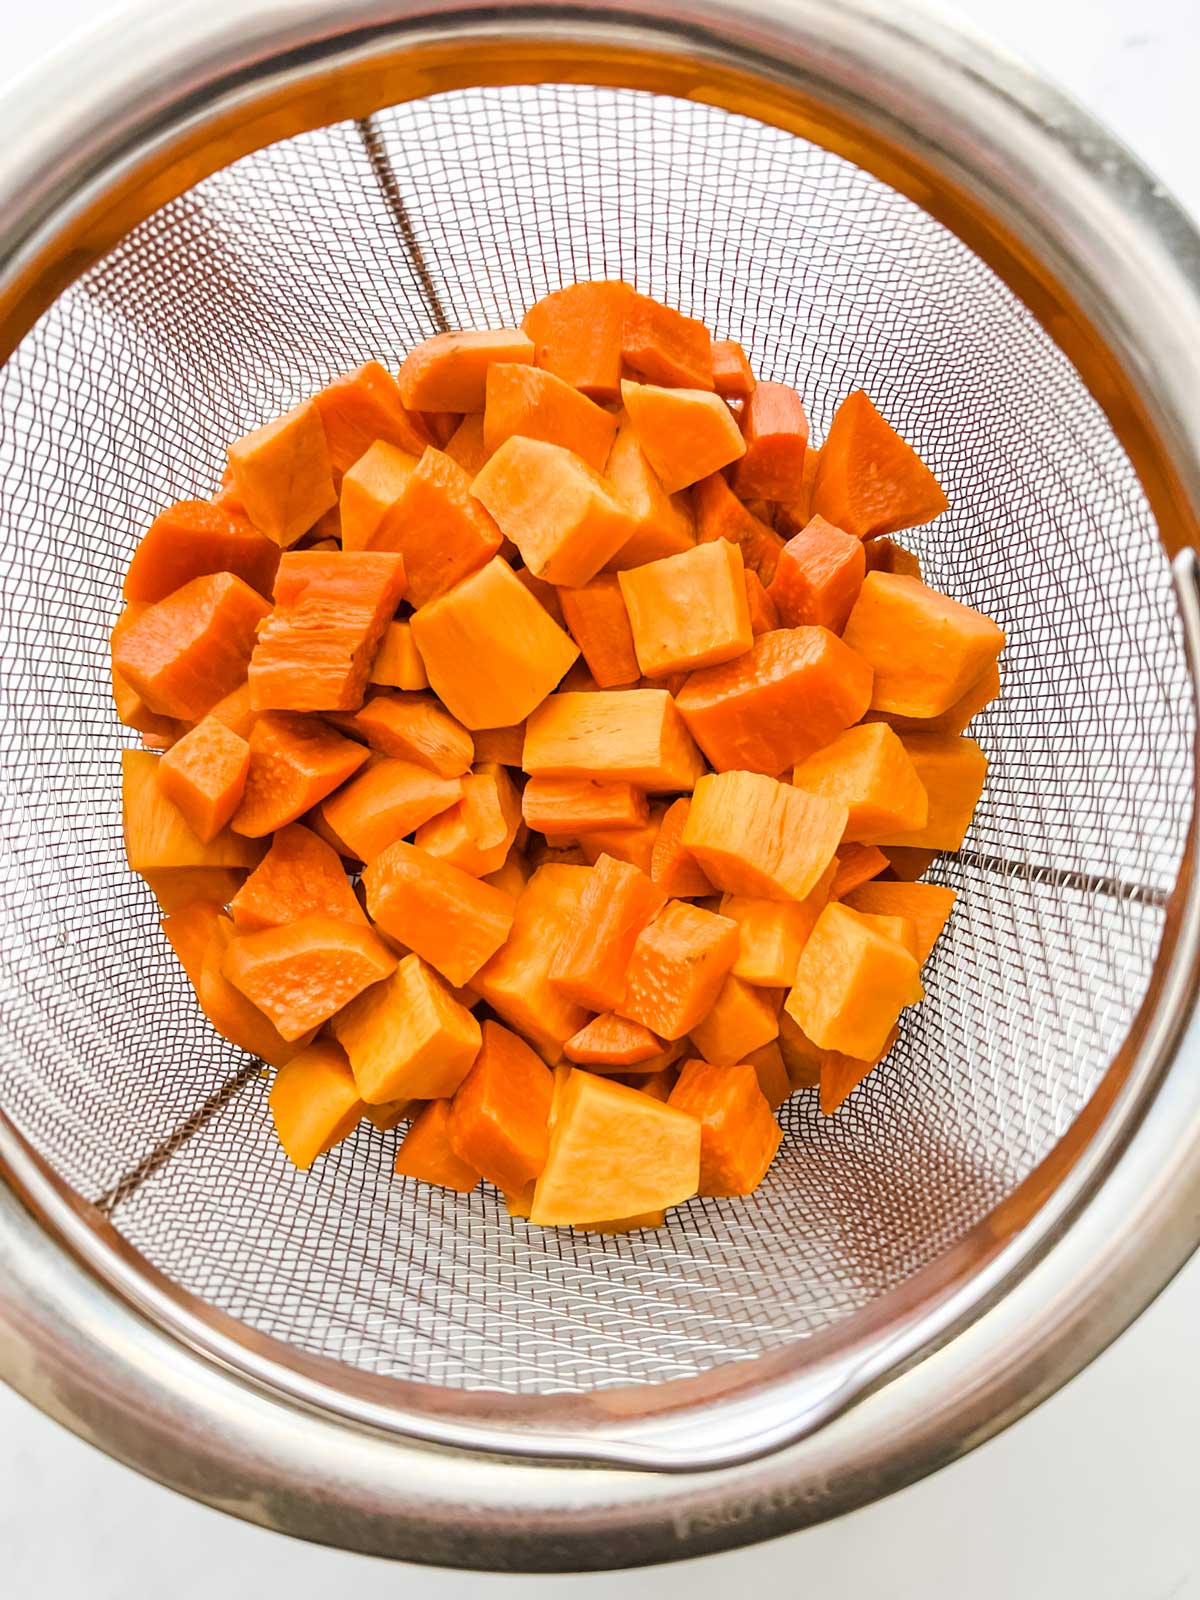 Cubed sweet potatoes in a steamer basket that have been cooked in an Instant Pot.